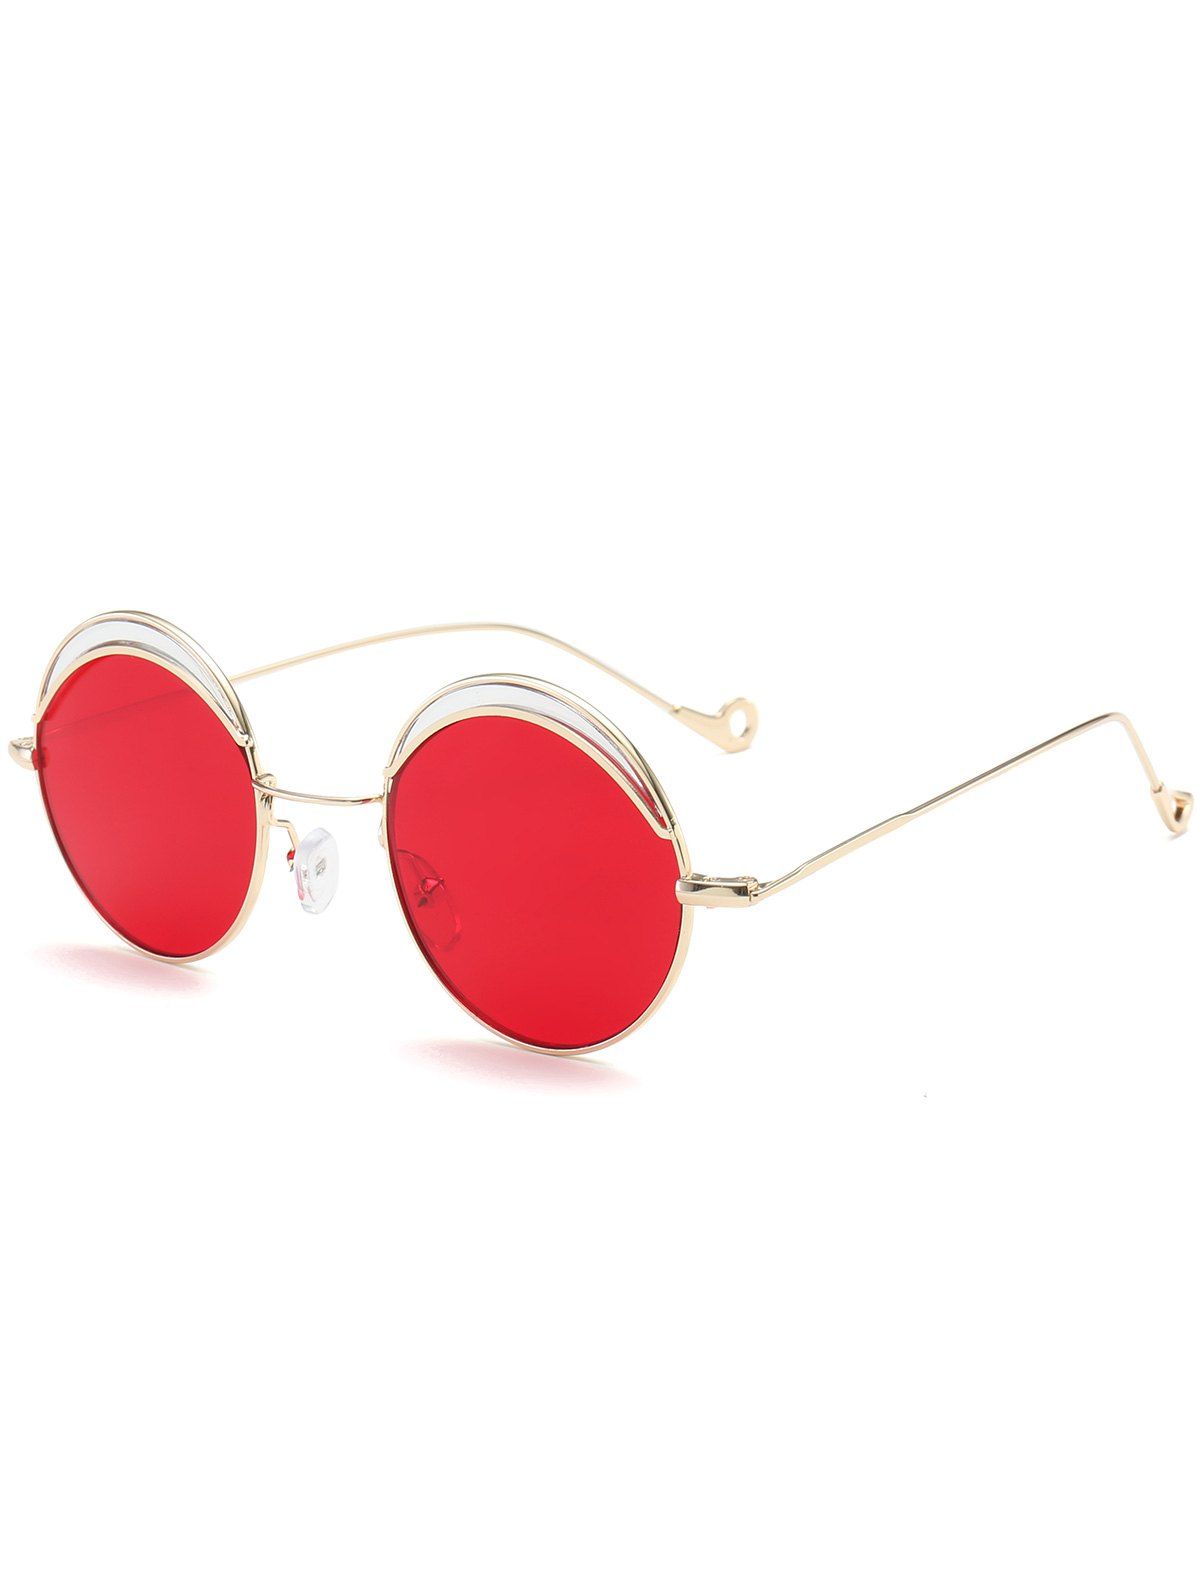 Two-tone Spliced Round Hollow Out Leg Sunglasses - BRIGHT RED 